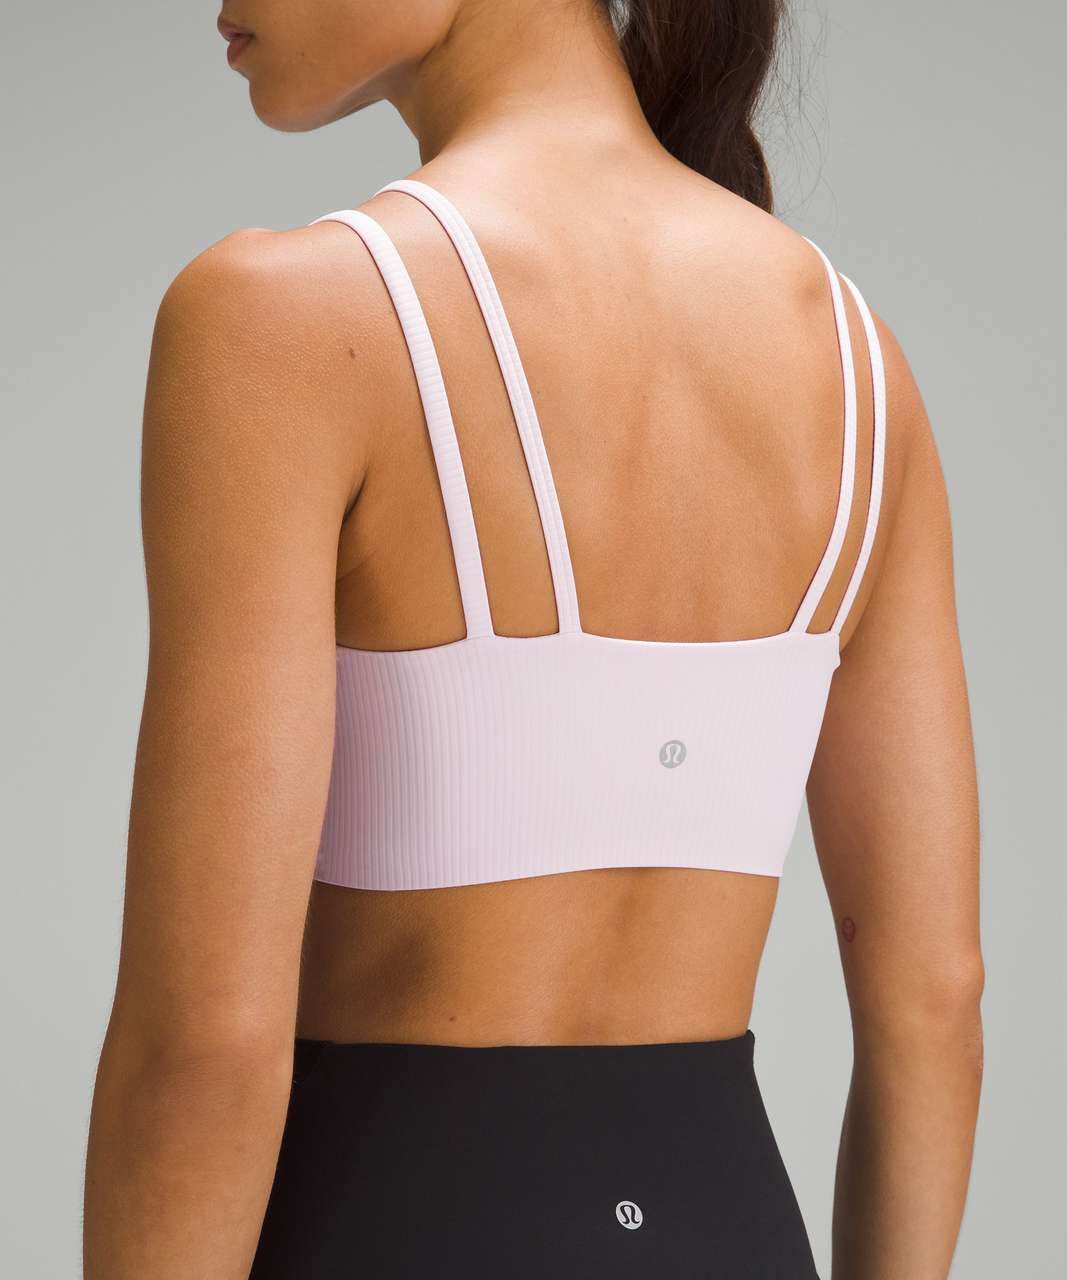 Lululemon sports bra thin stripes strappy back in pink and white. There is  no size listed but fits like small.